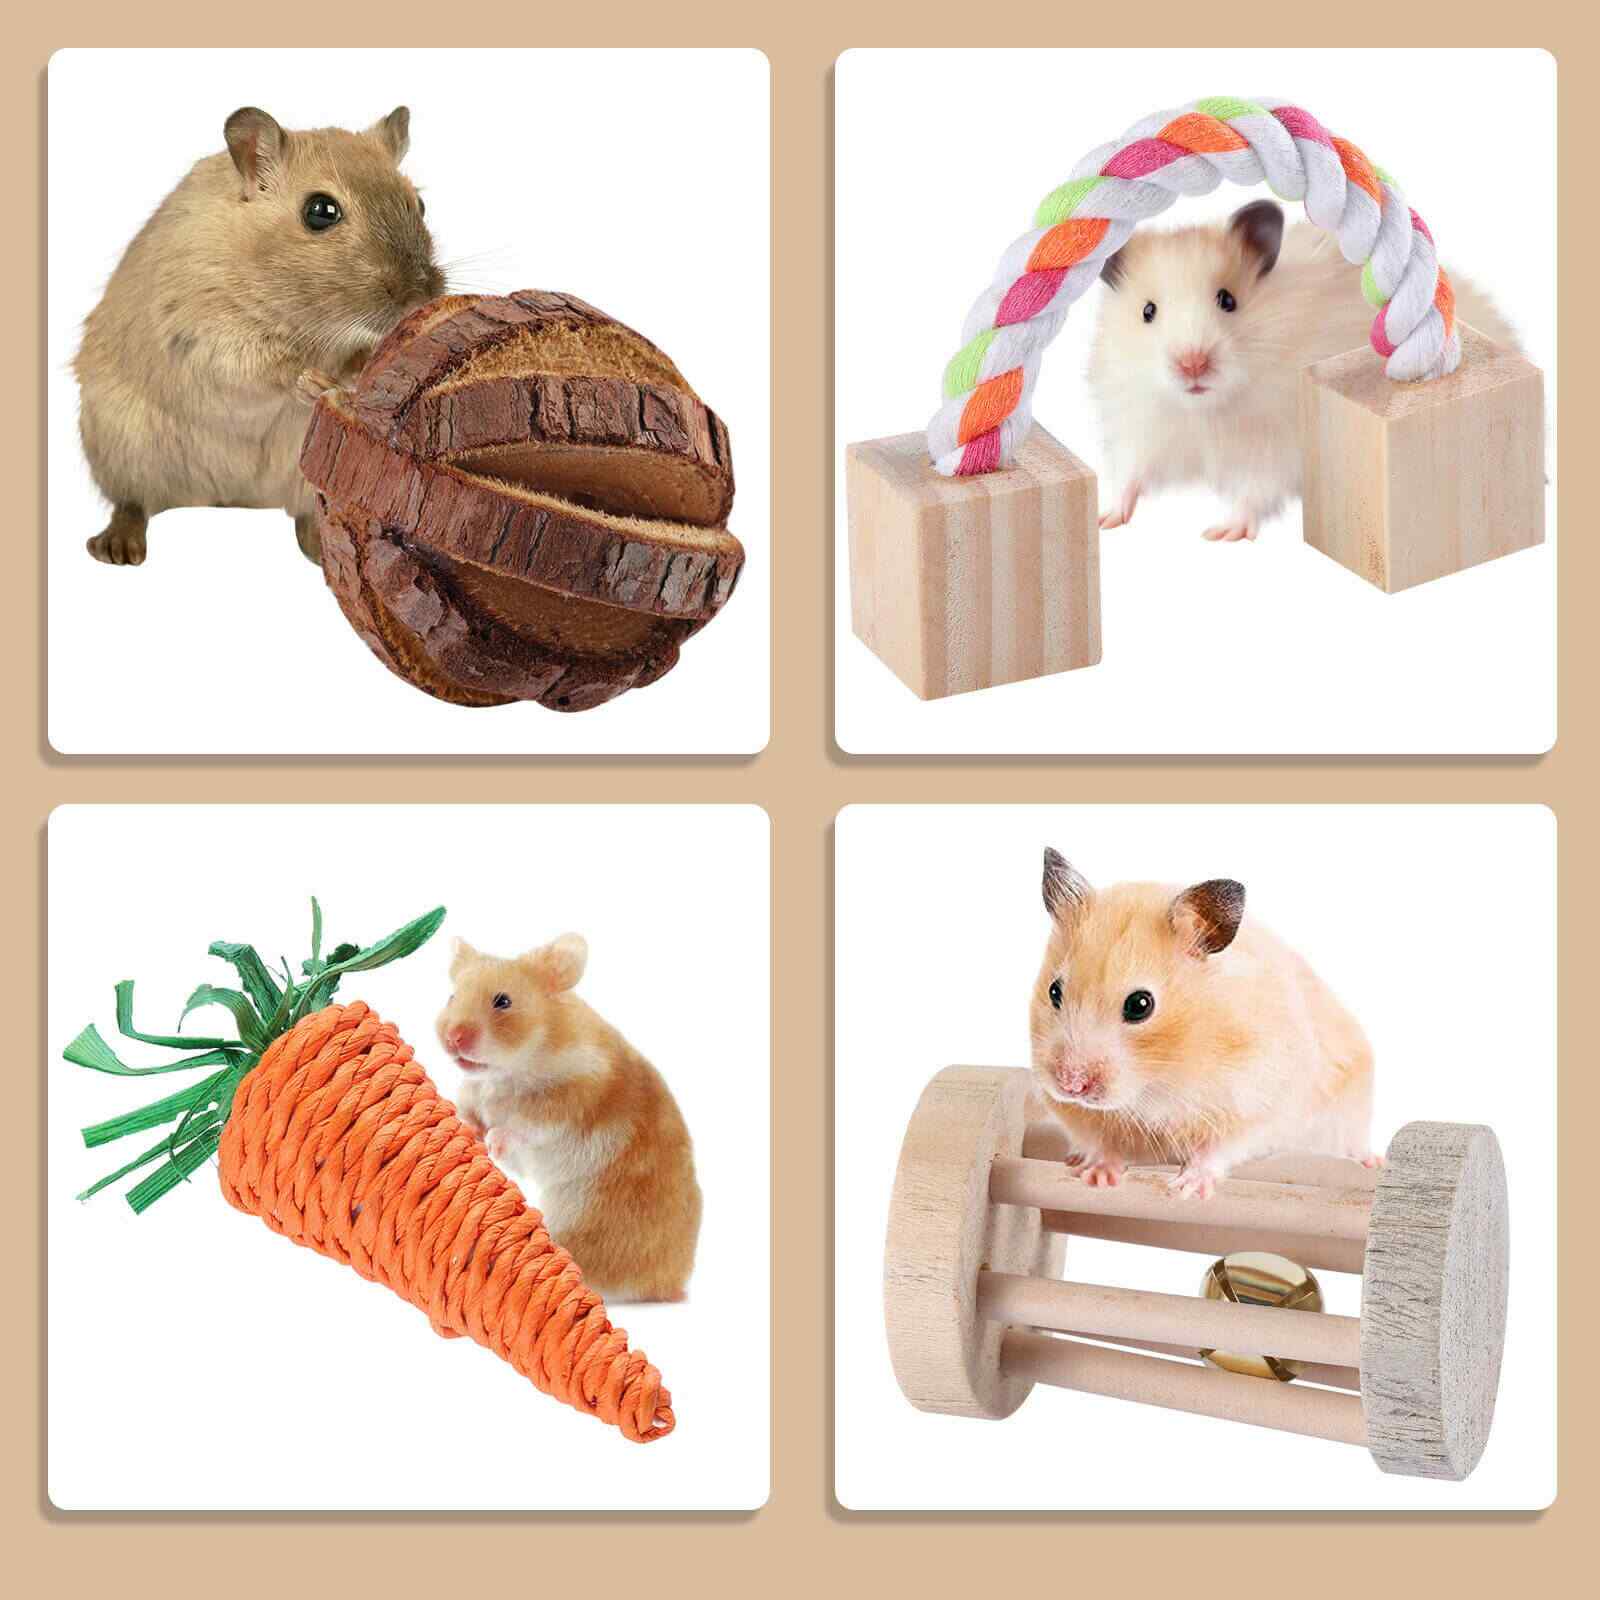 Showing of 11Pcs Wooden Hamster Chew Toys Accessories